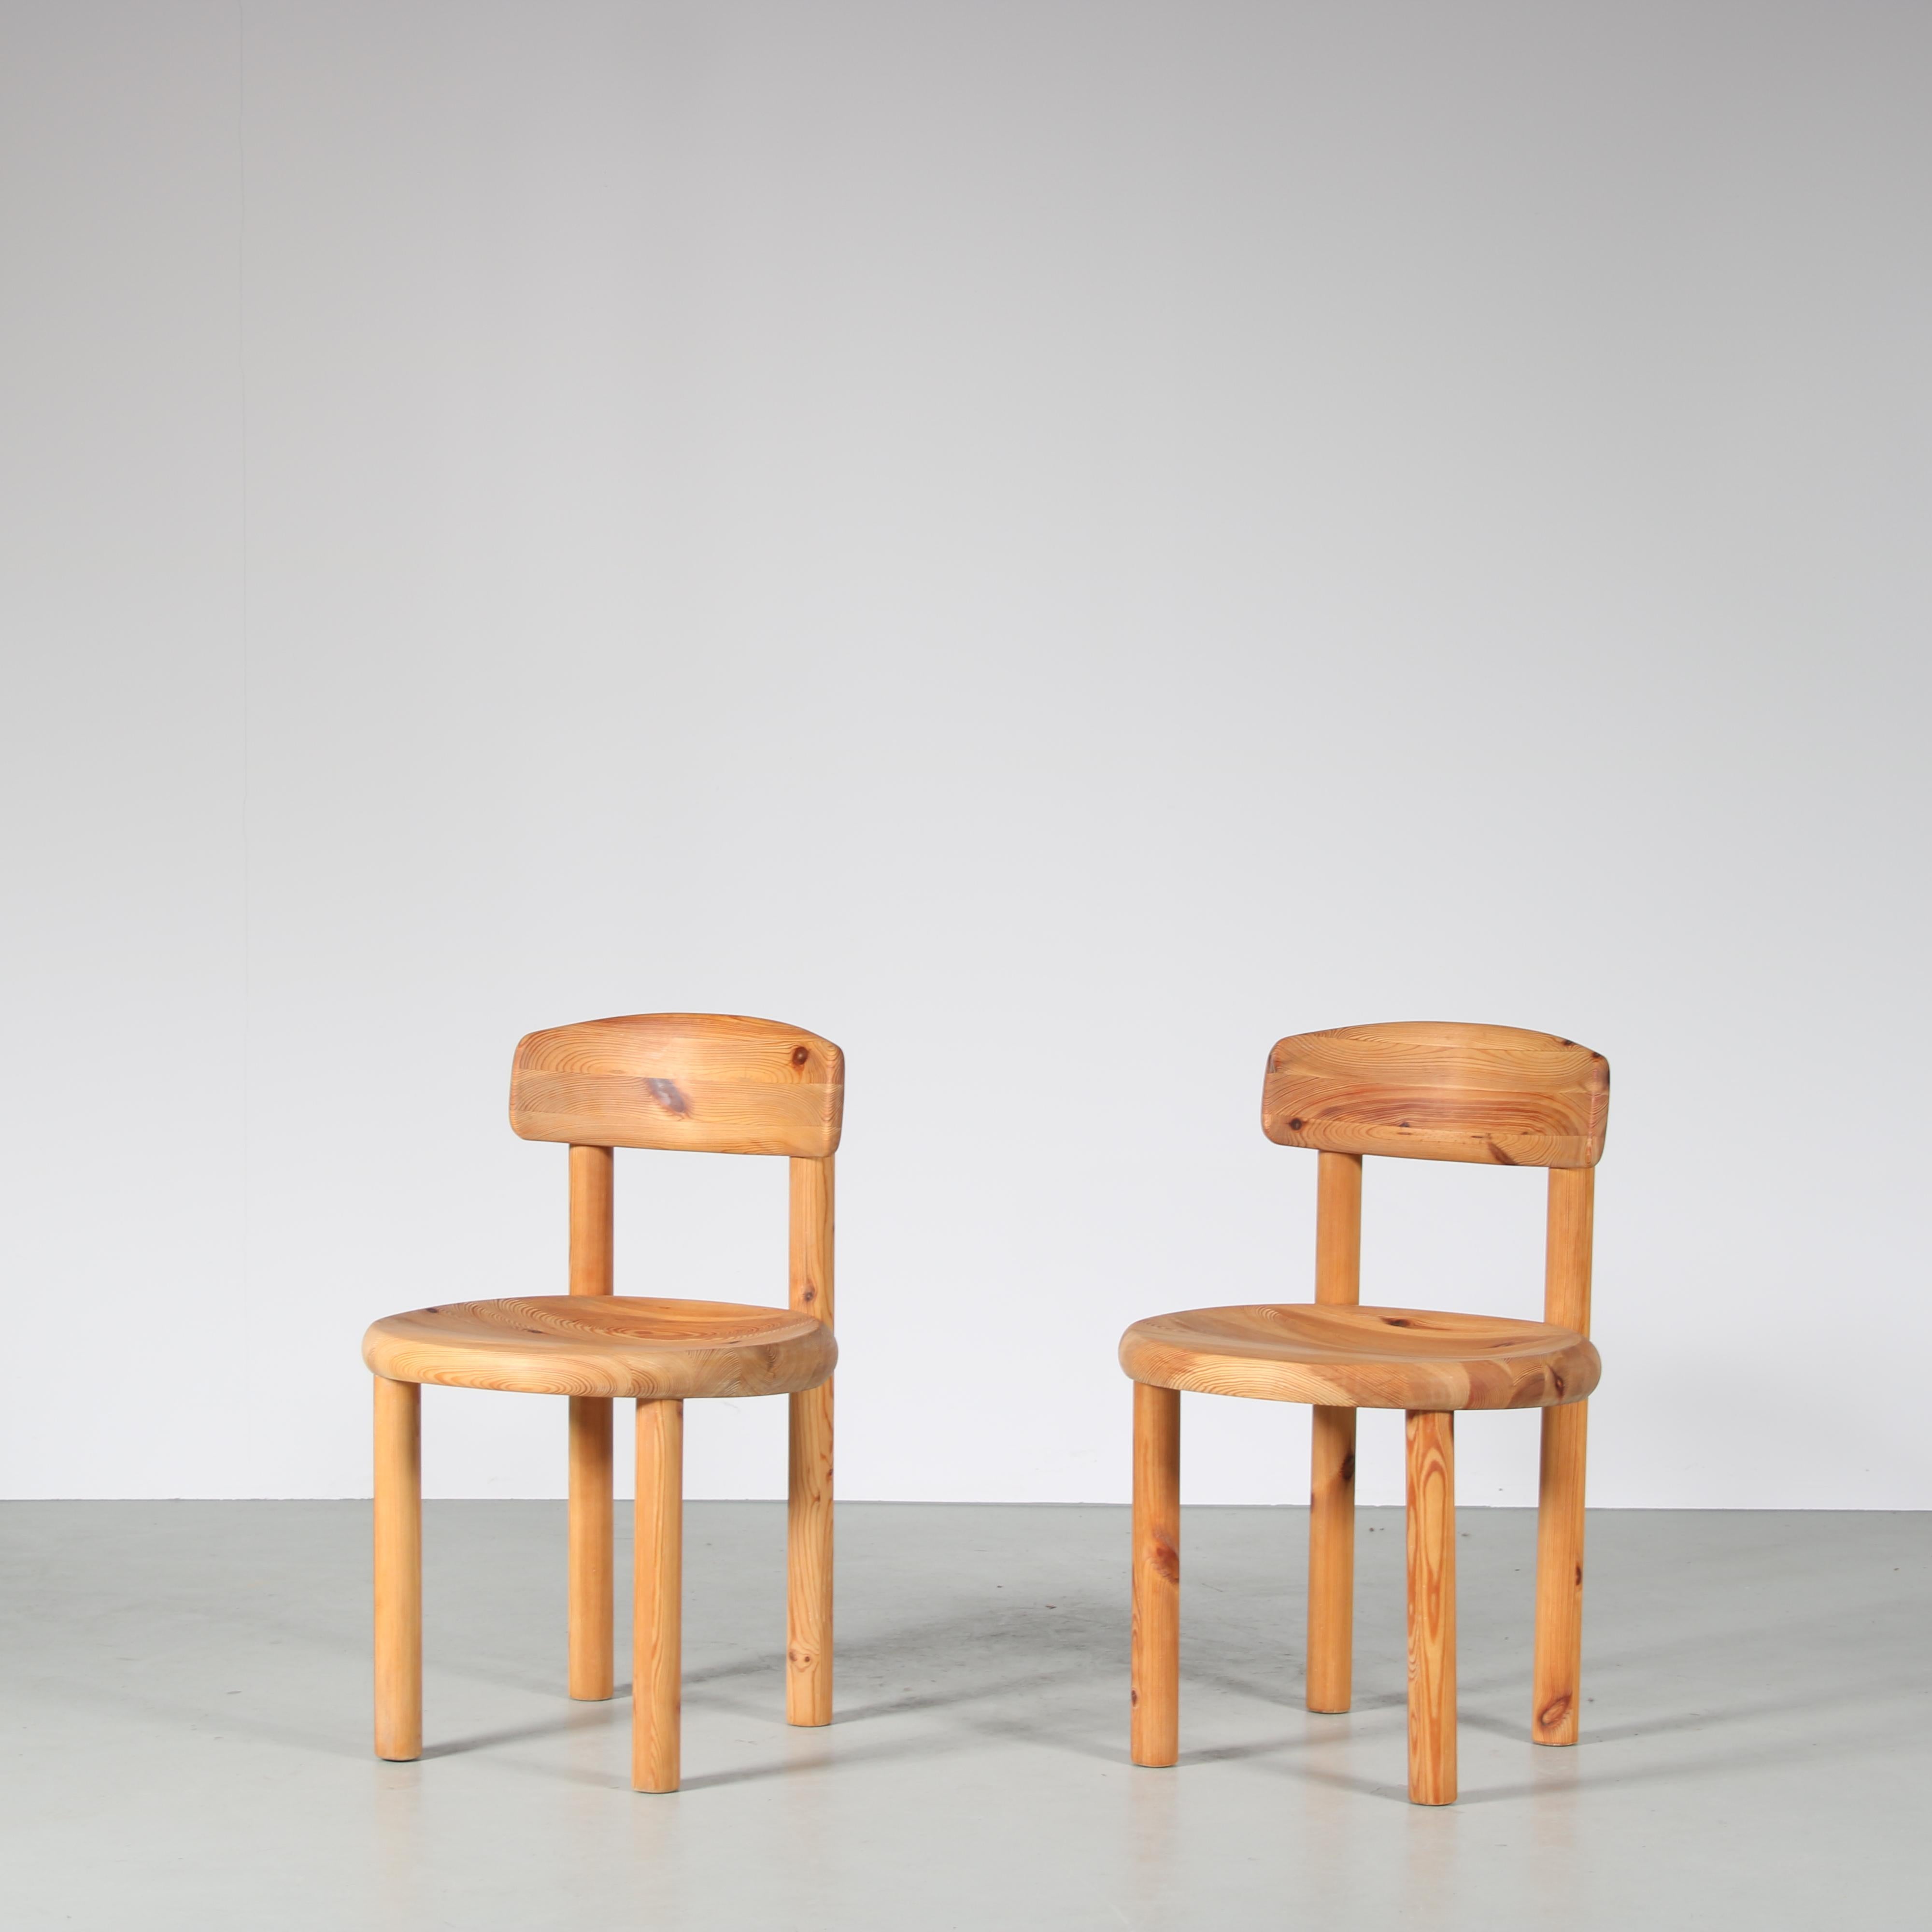 An very nice pair of dining chairs designed by Rainer Daumiller, manufactured by Hirtshals Sawmill in Denmark, circa 1970.

These eye-catching dining chairs are made of the highest quality solid pinewood in the natural rich brown / blonde color. The